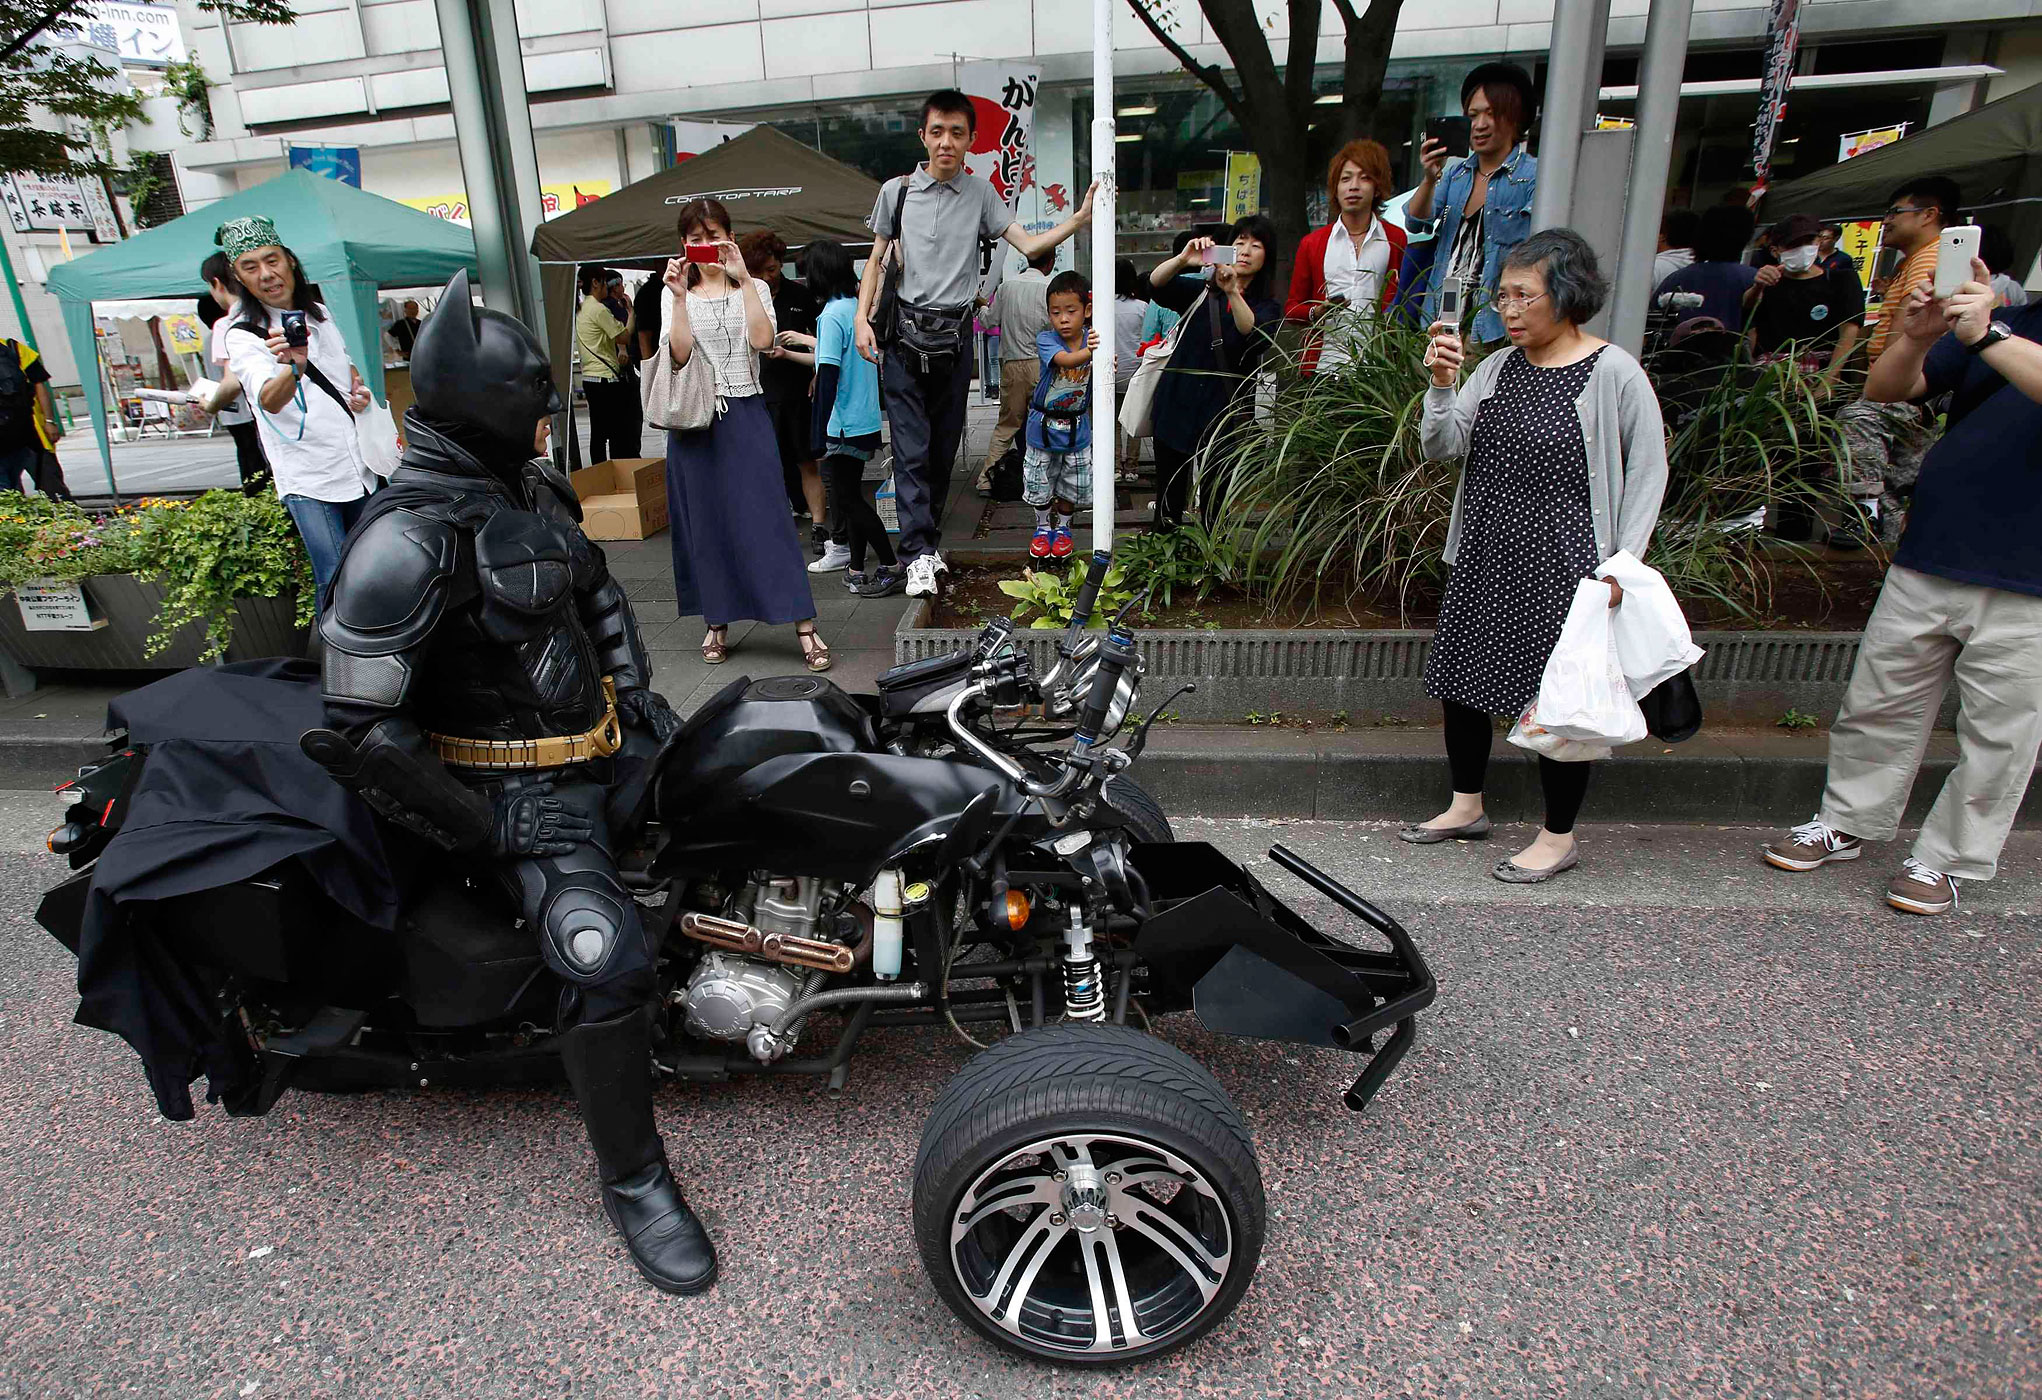 People take pictures of Chibatman in Chiba.